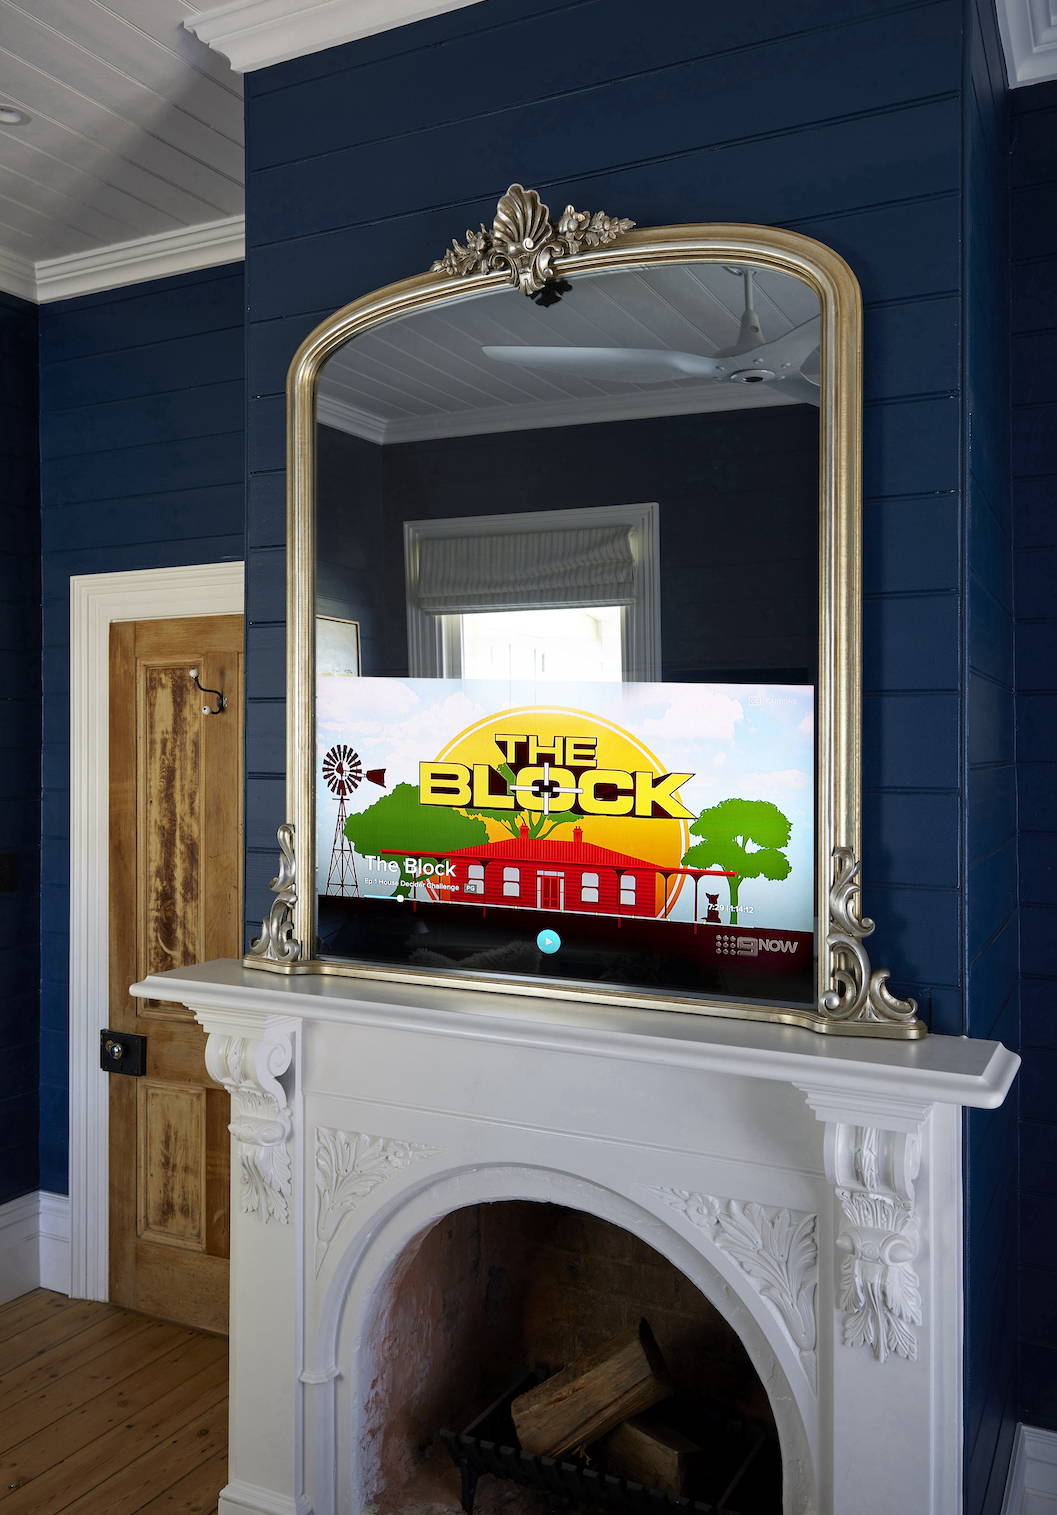 Victorian Arched TV-Mirror in Ornate Soft Silver Leaf Frame - an arched ornate mirror design with Samsung TV in base